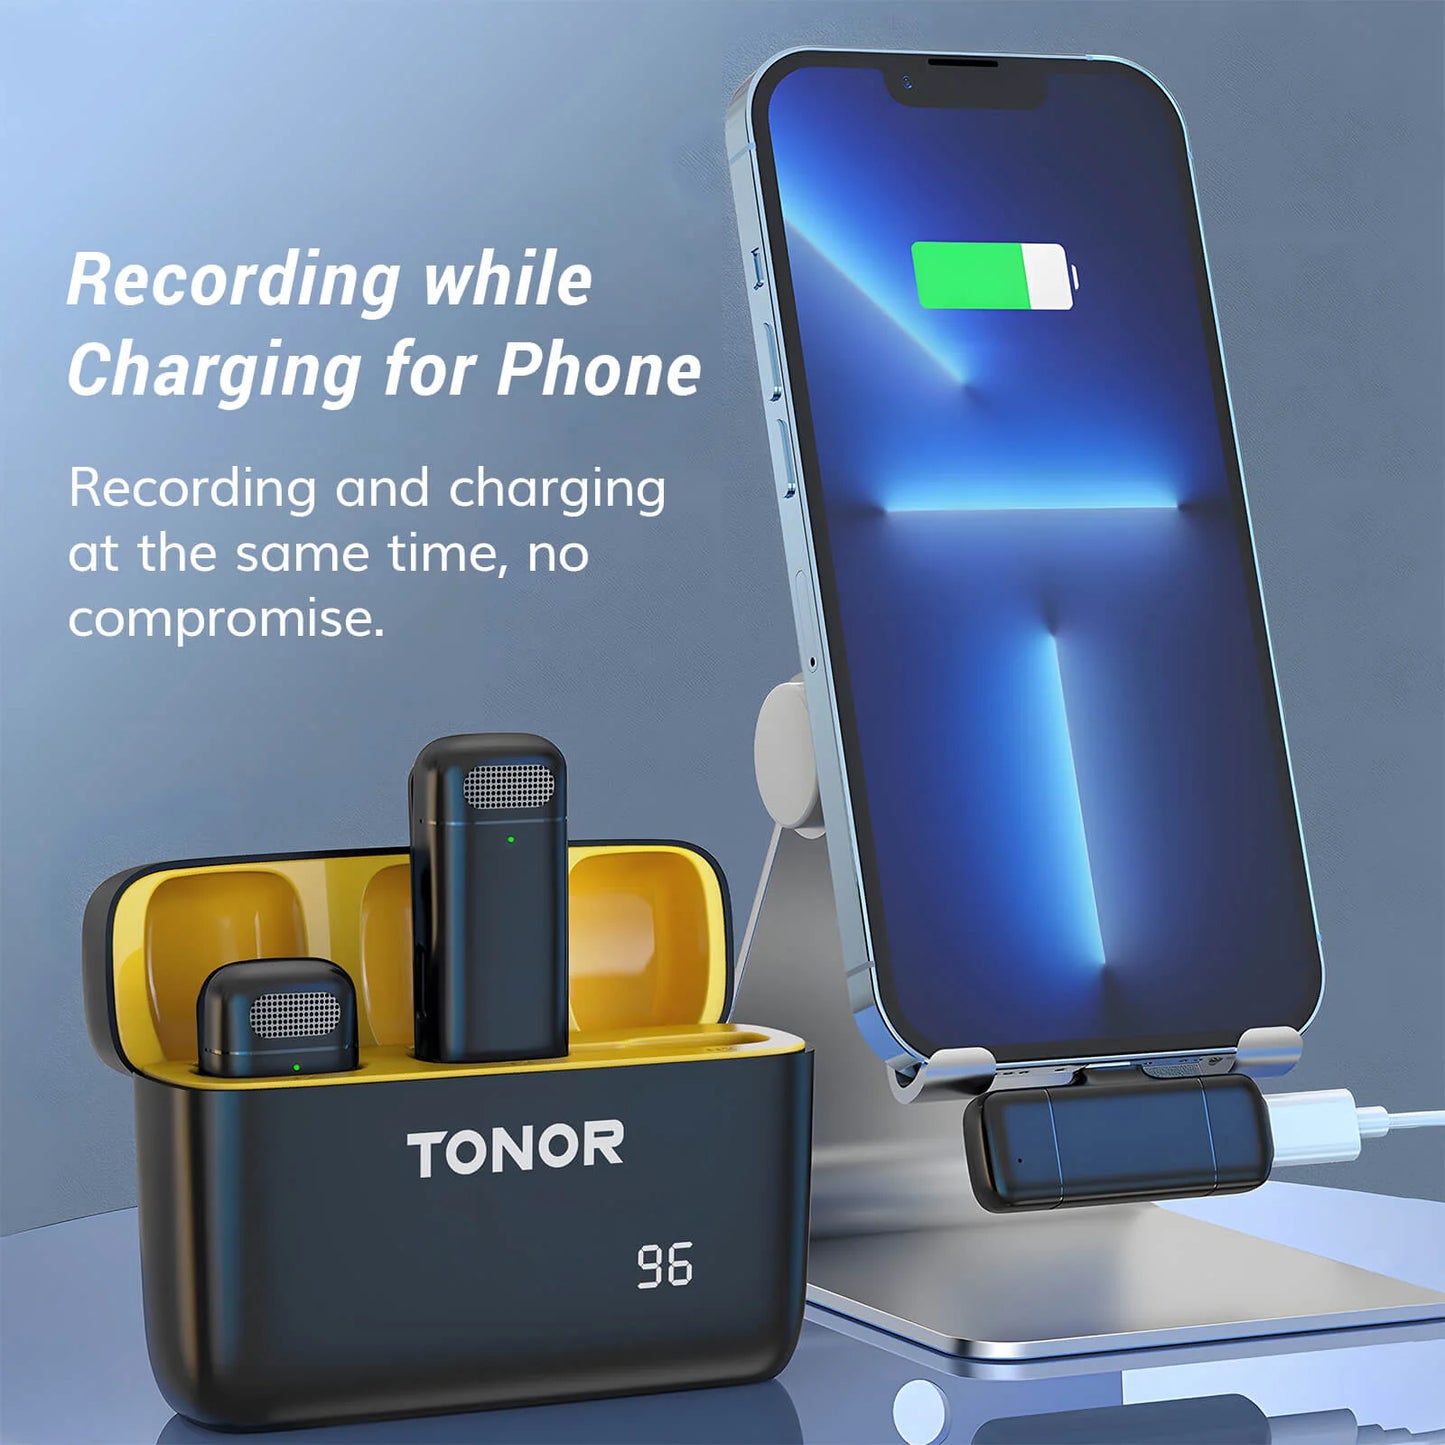 TONOR wireless lavalier microphone is suitable for iPhone/iPad/Android mobile phones